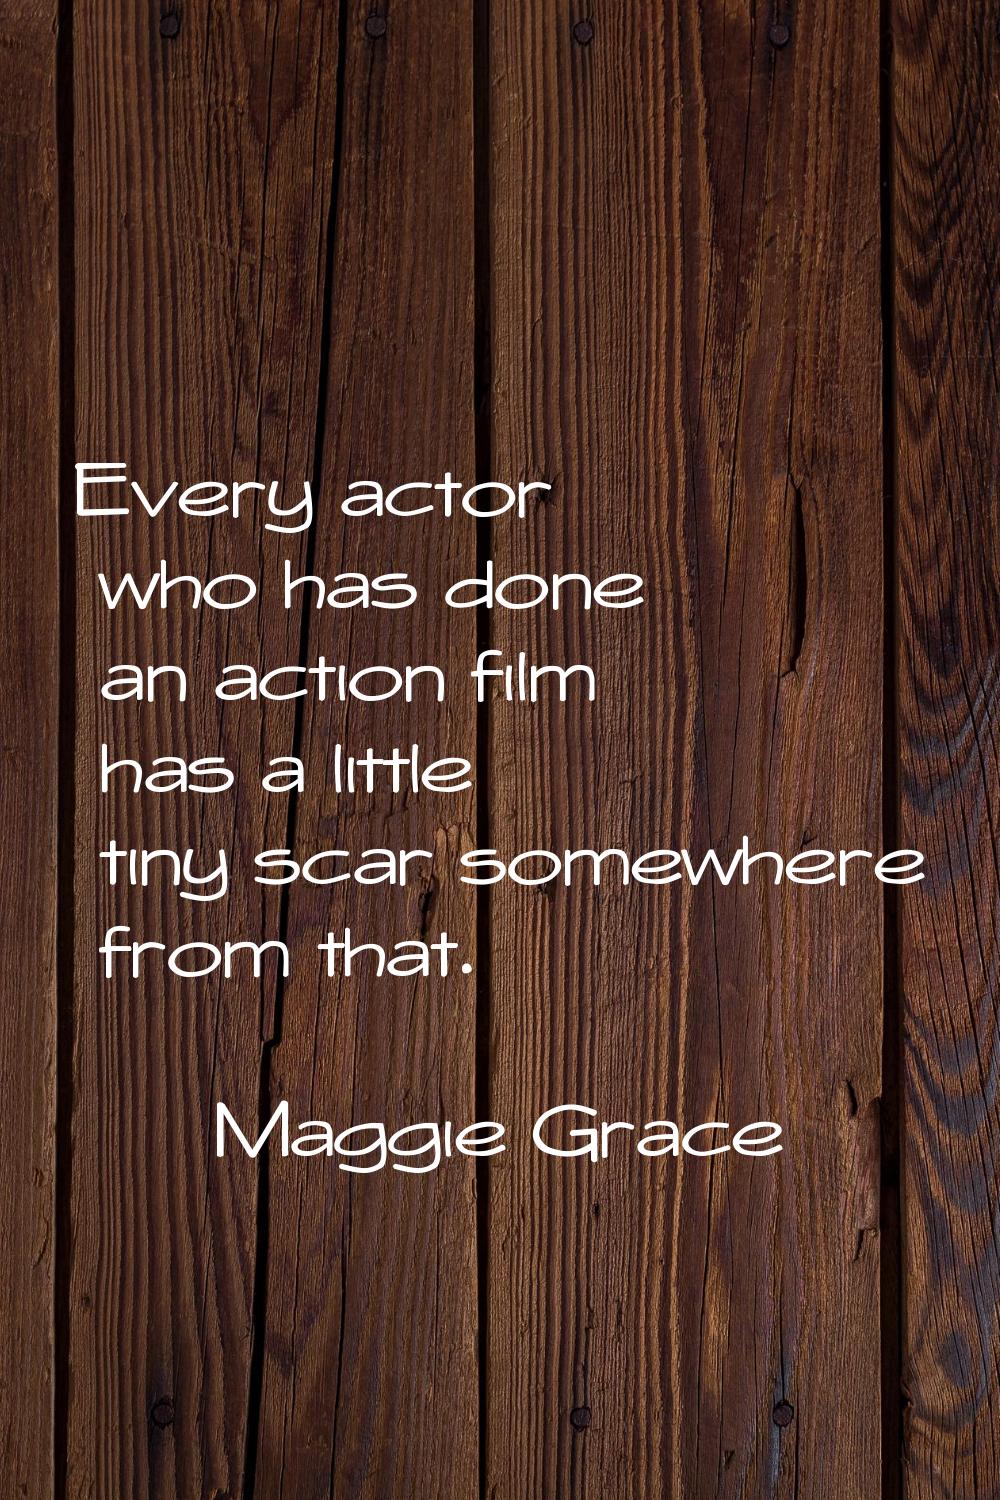 Every actor who has done an action film has a little tiny scar somewhere from that.